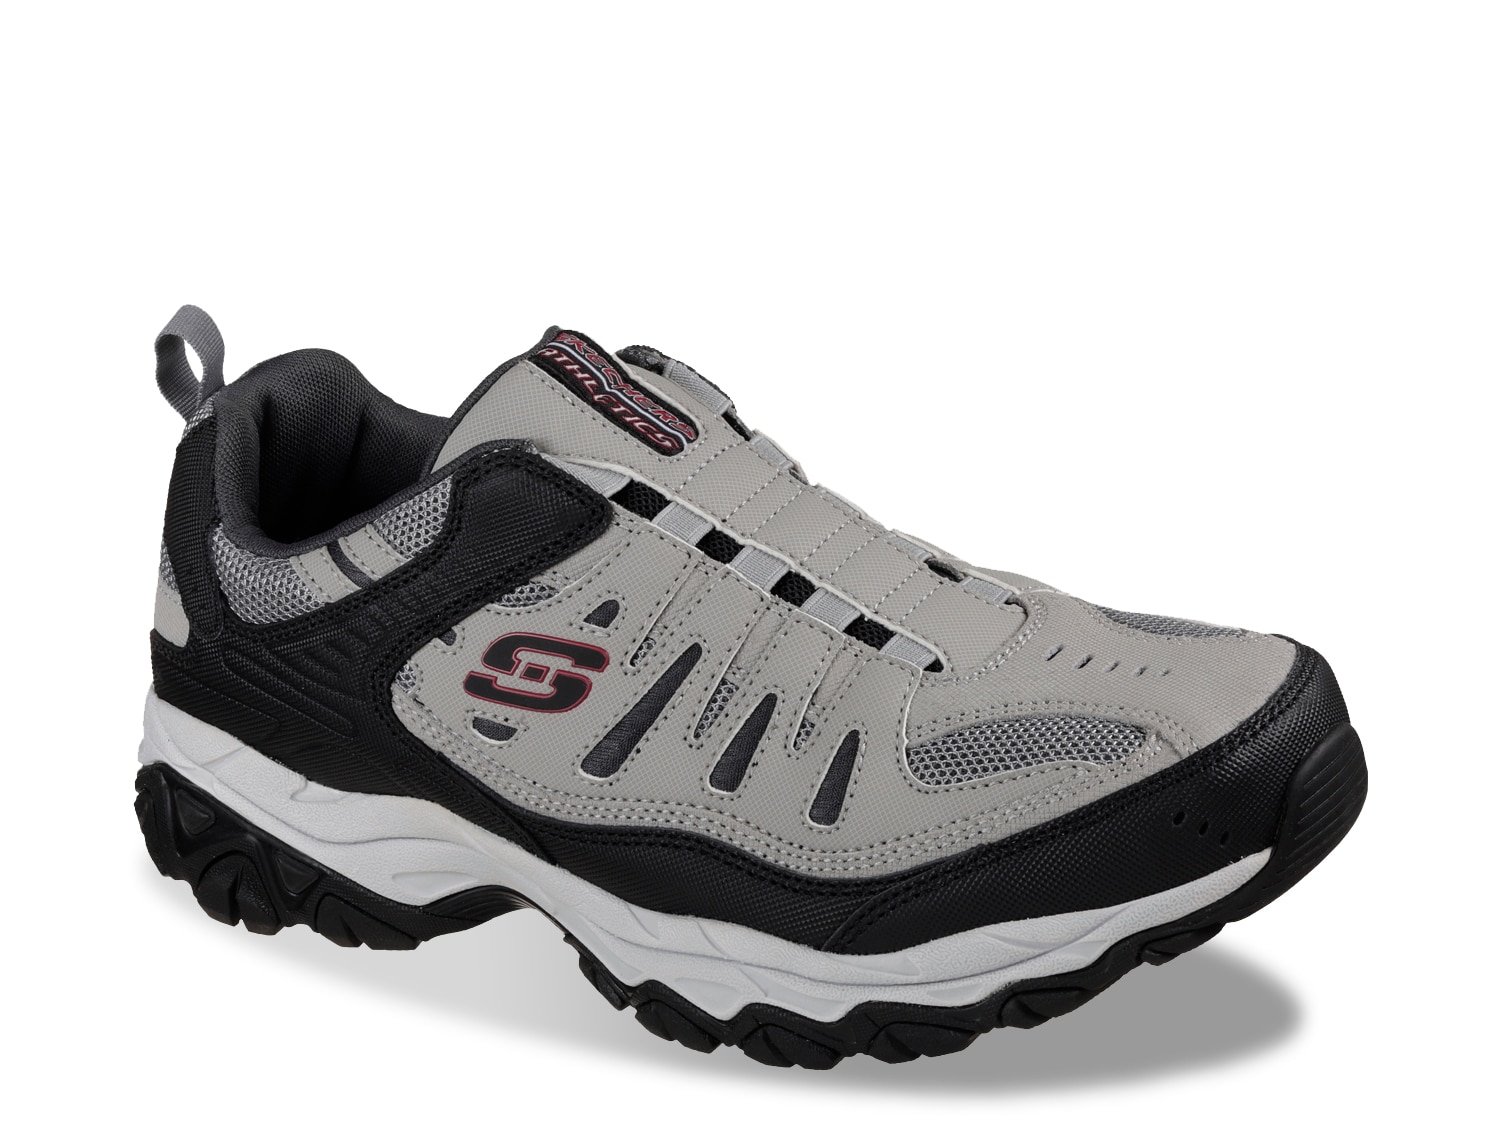 skechers extra wide mens shoes